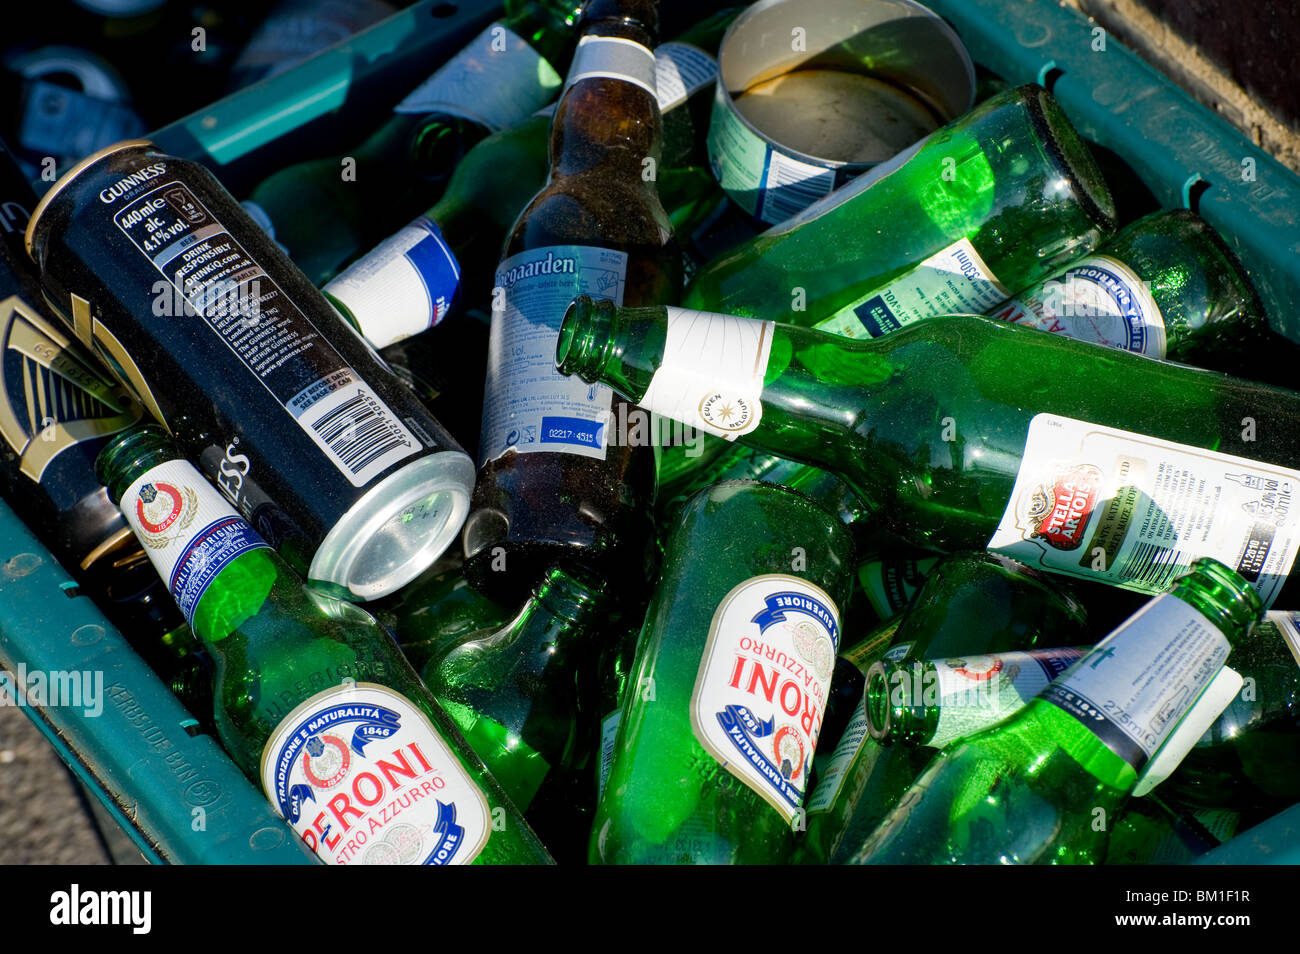 Glass beer bottles awaiting collection in a recycling bin. Stock Photo